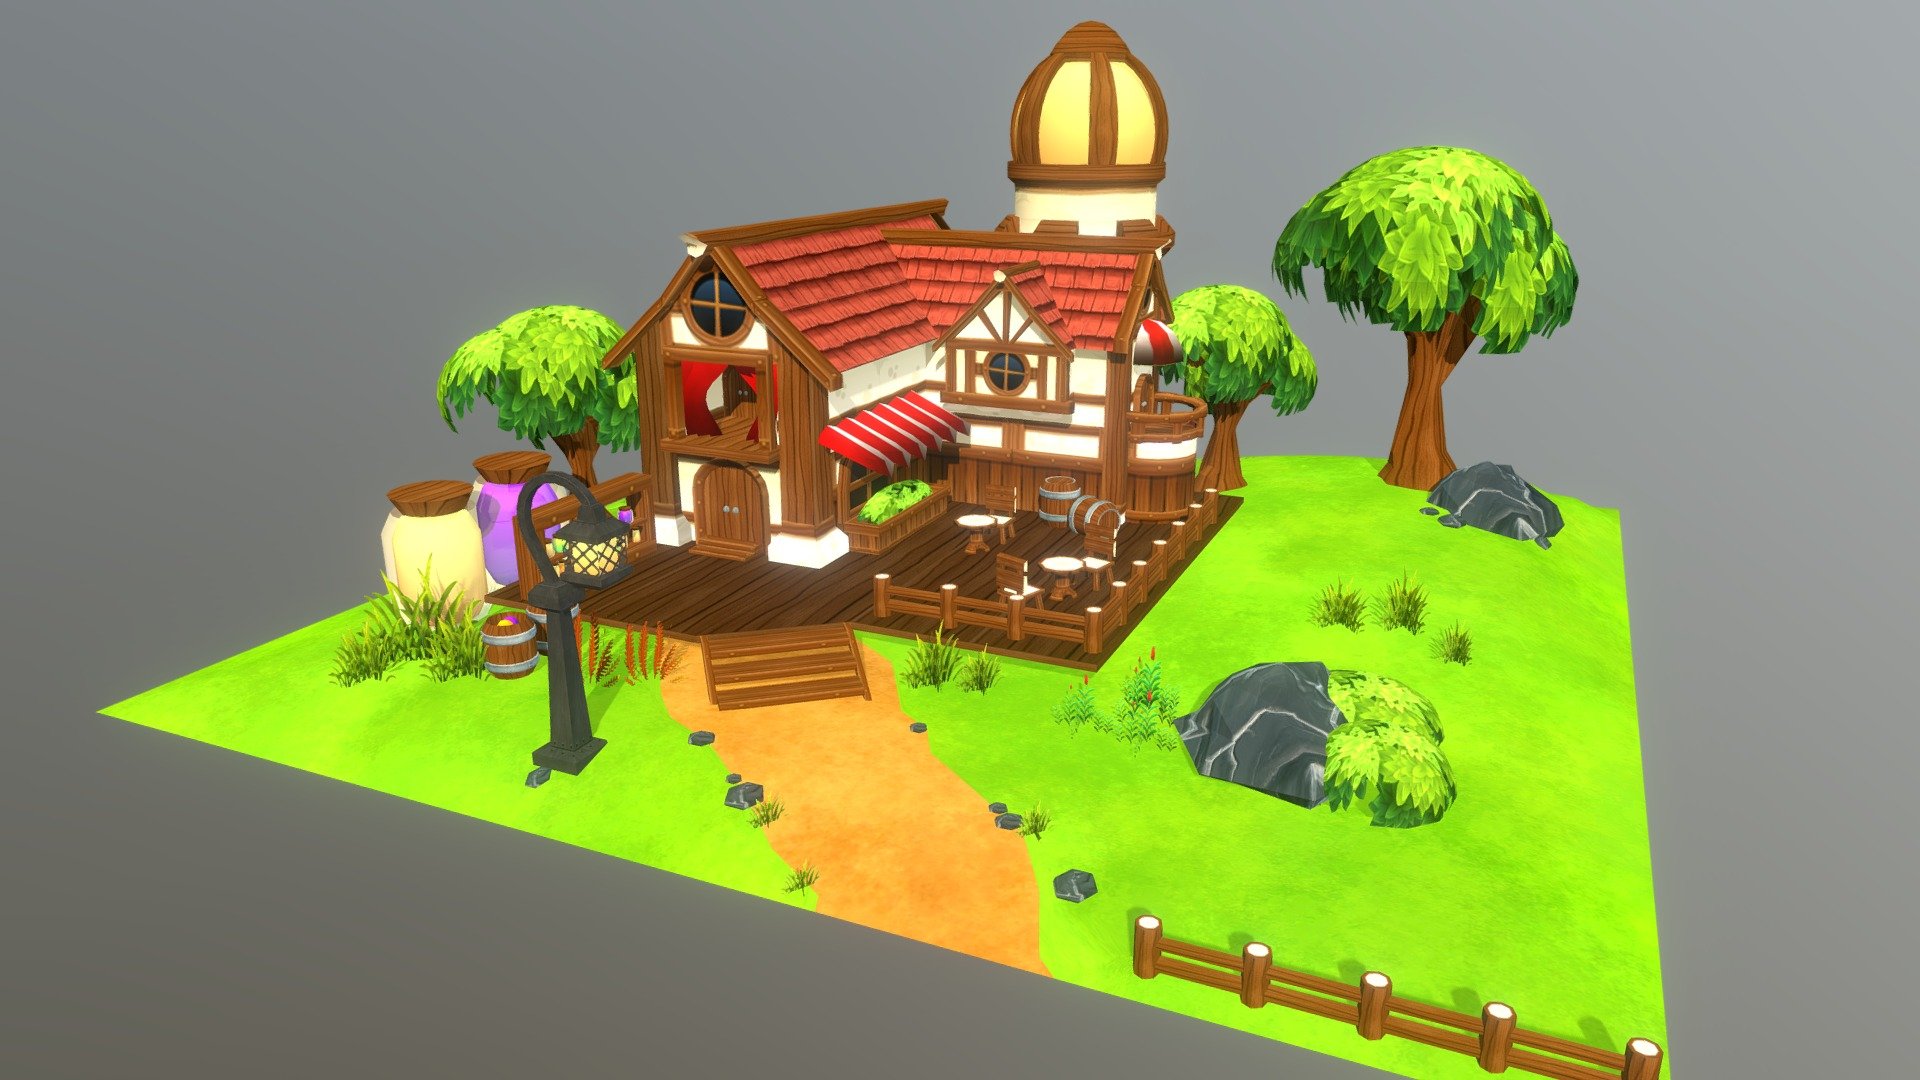 Had to create a interior or exterior of a house/room model for an assignment in school so I made a fantasy Tavern.

Textures:

House: https://opengameart.org/content/houseblocks
Wood: https://opengameart.org/content/light-wood-1024x1024
Lampost Grate: https://opengameart.org/content/metal-grate
Barrel: https://opengameart.org/content/rpg-item-collection-2
Leaves: https://opengameart.org/content/cool-leaves-textures

Ground
https://opengameart.org/content/blended-textures-of-dirt-and-gras
https://opengameart.org/content/10-seamless-grass-textures-that-are-2048-x-2048

Props:
Lamppost: https://opengameart.org/content/2048-stylized-tileable-metal-panel
Rocks: https://opengameart.org/content/hand-painted-mountain-texture

Grass: 
https://opengameart.org/content/stylized-grass-and-bush-textures
https://opengameart.org/content/stylized-grass-and-bush-textures-0 - Stylized Fantasy Tavern - Download Free 3D model by valhel 3d model